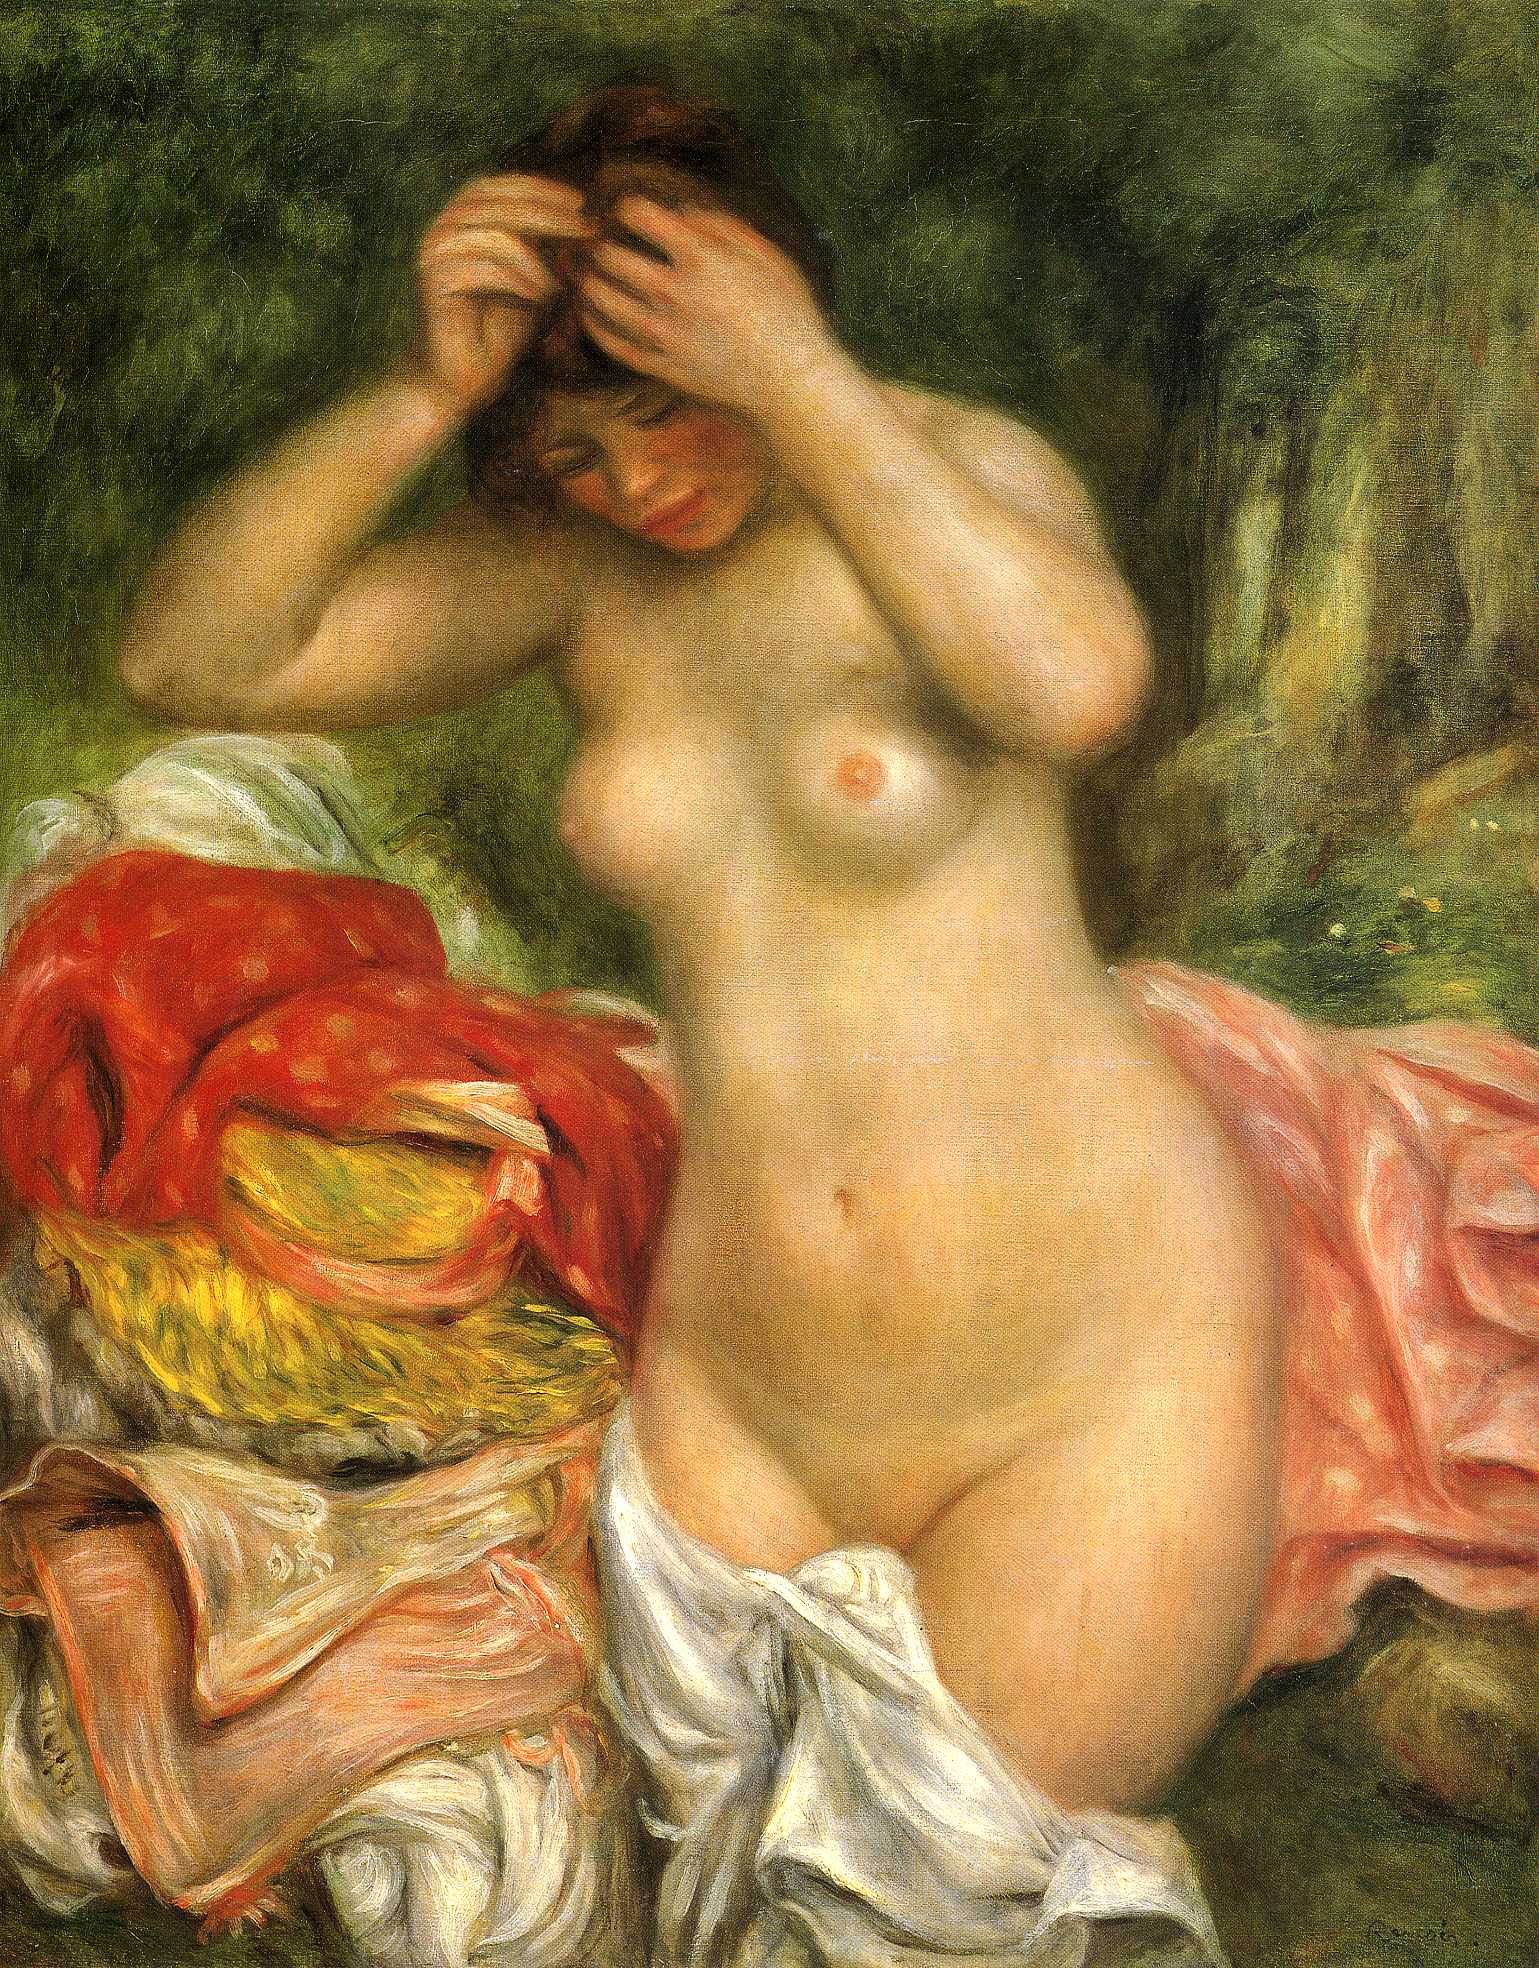 Bather arranging her Hair - Pierre-Auguste Renoir painting on canvas